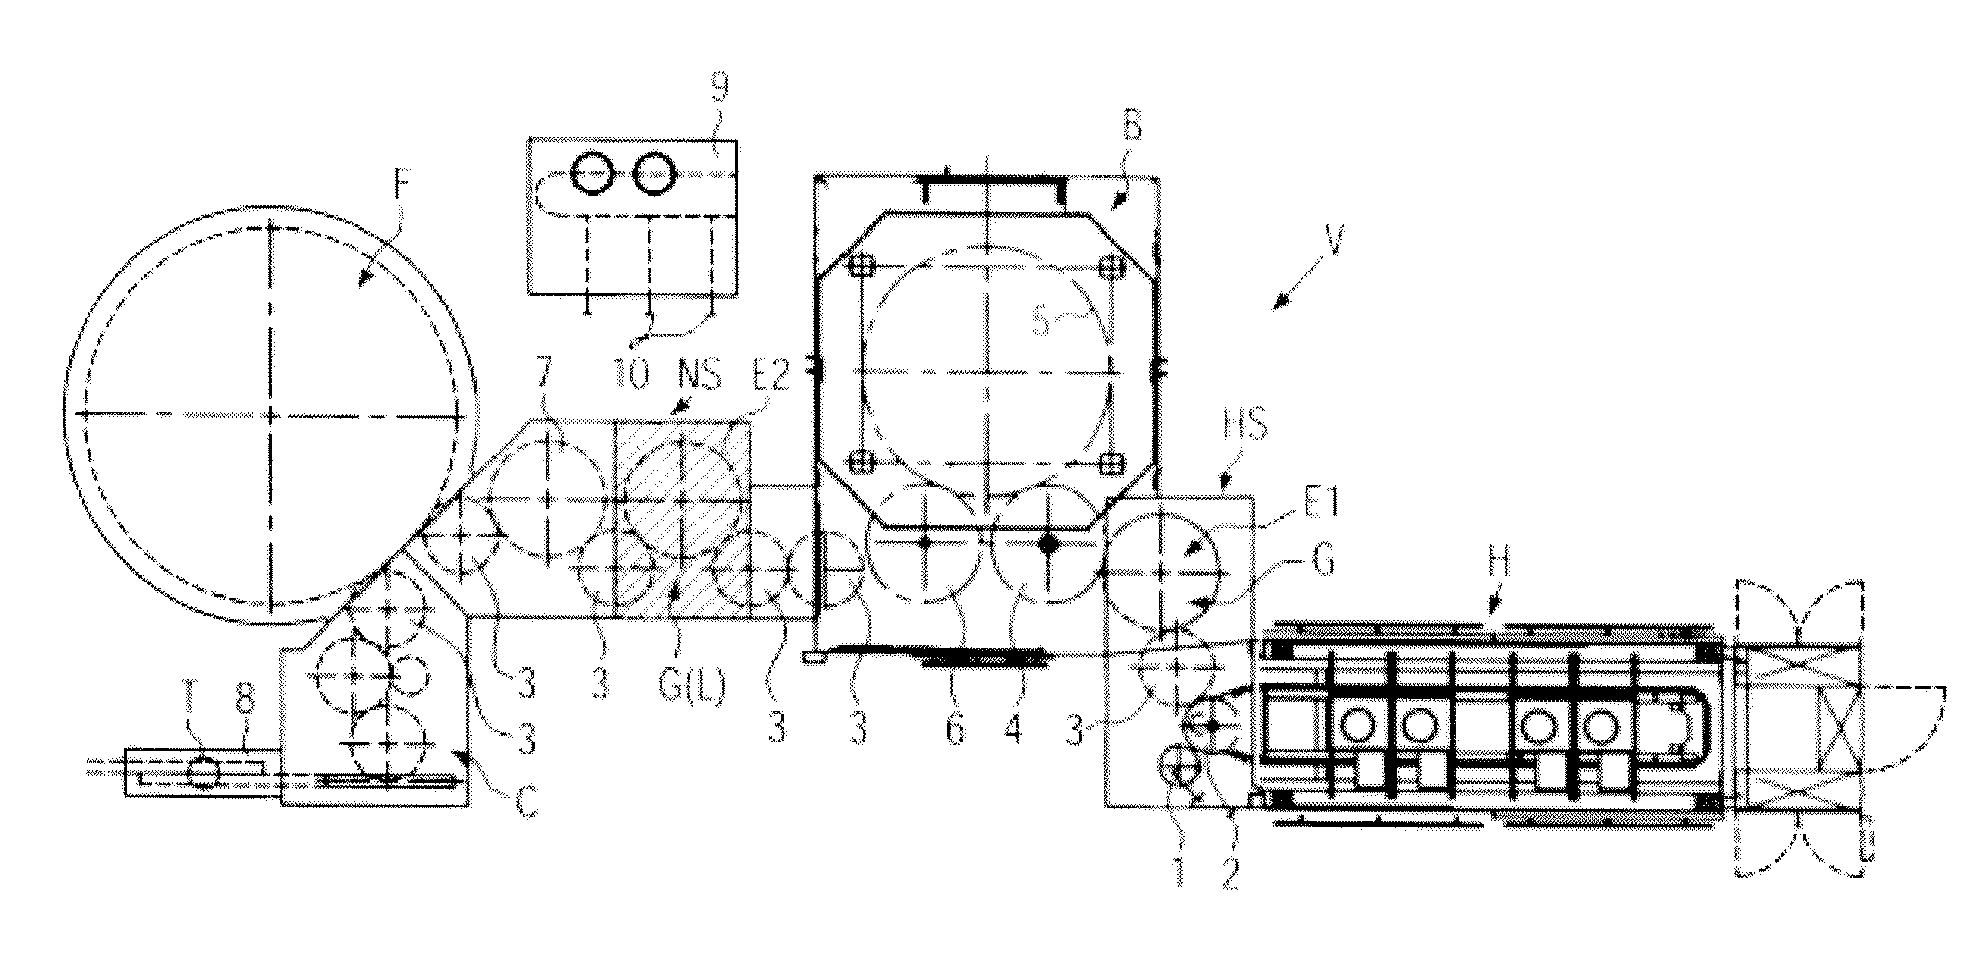 Method and Device for Stretch Blow Molding or Blow Molding and Filling Sterile Containers